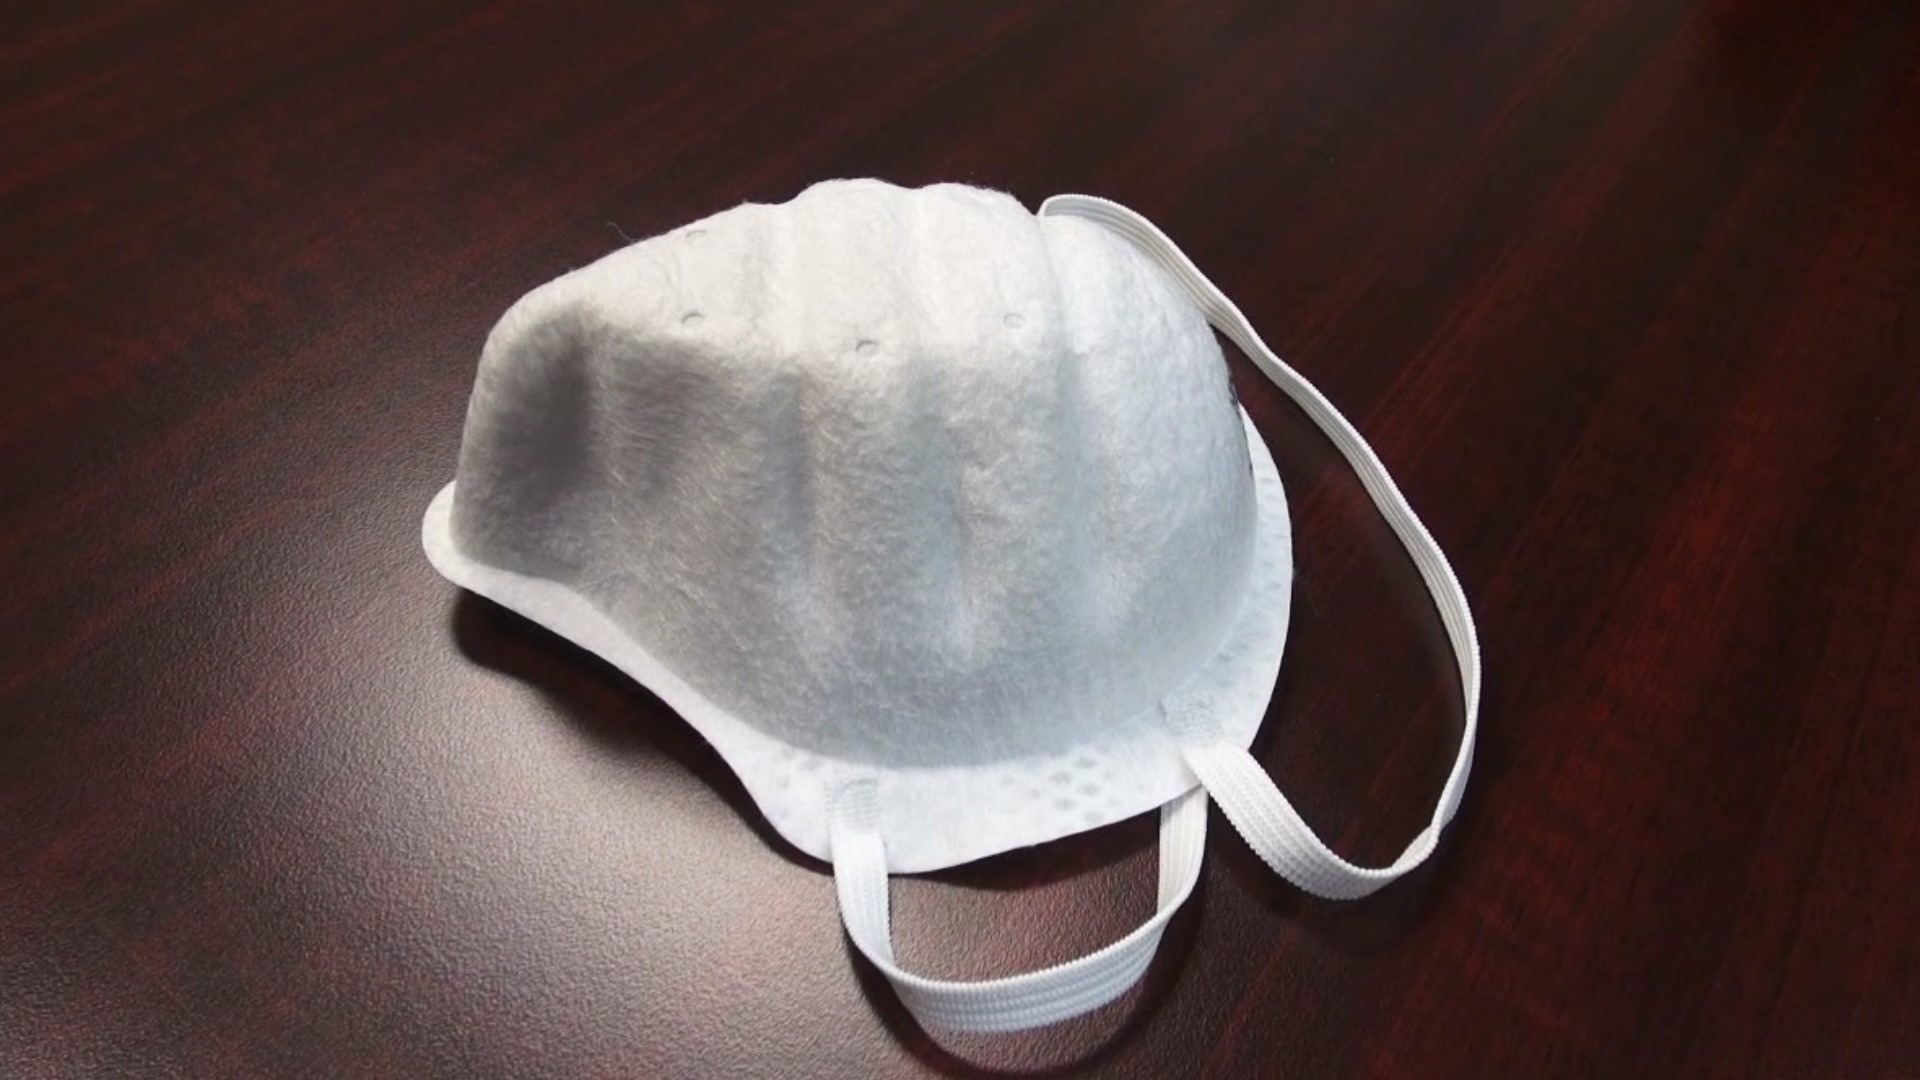 Now that the federal government is distributing free N95 masks through community health centers, some may wonder how long they can use them and how to store them.